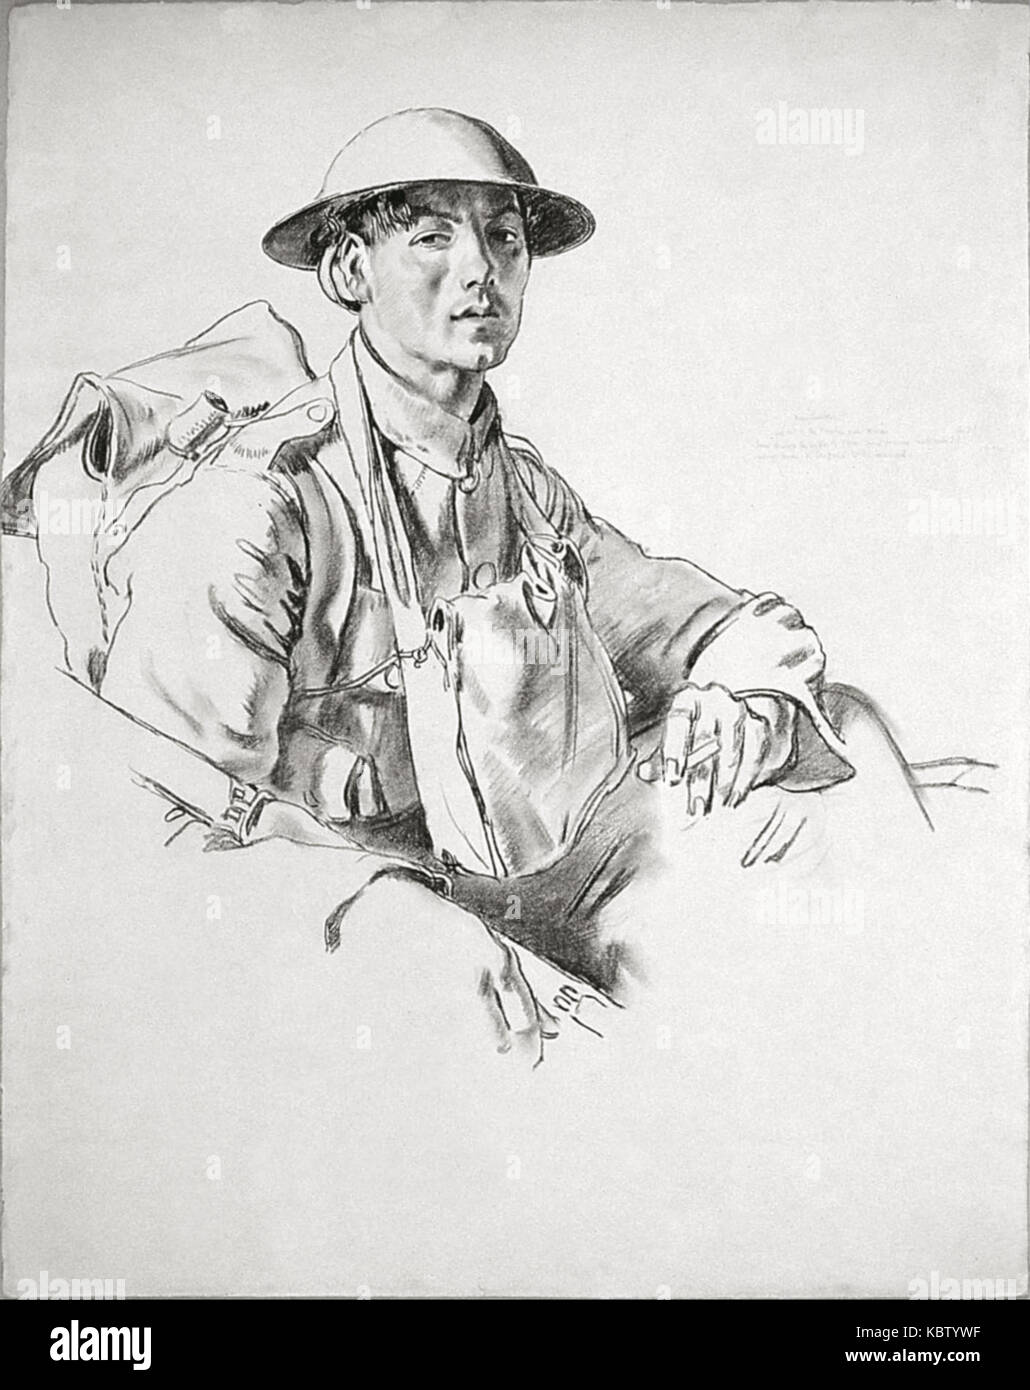 Orpen, William (Sir) (RA)   The Manchesters, Arras. 'Just out of the trenches near Arras. Been through the battles of Ypres and ... Stock Photo